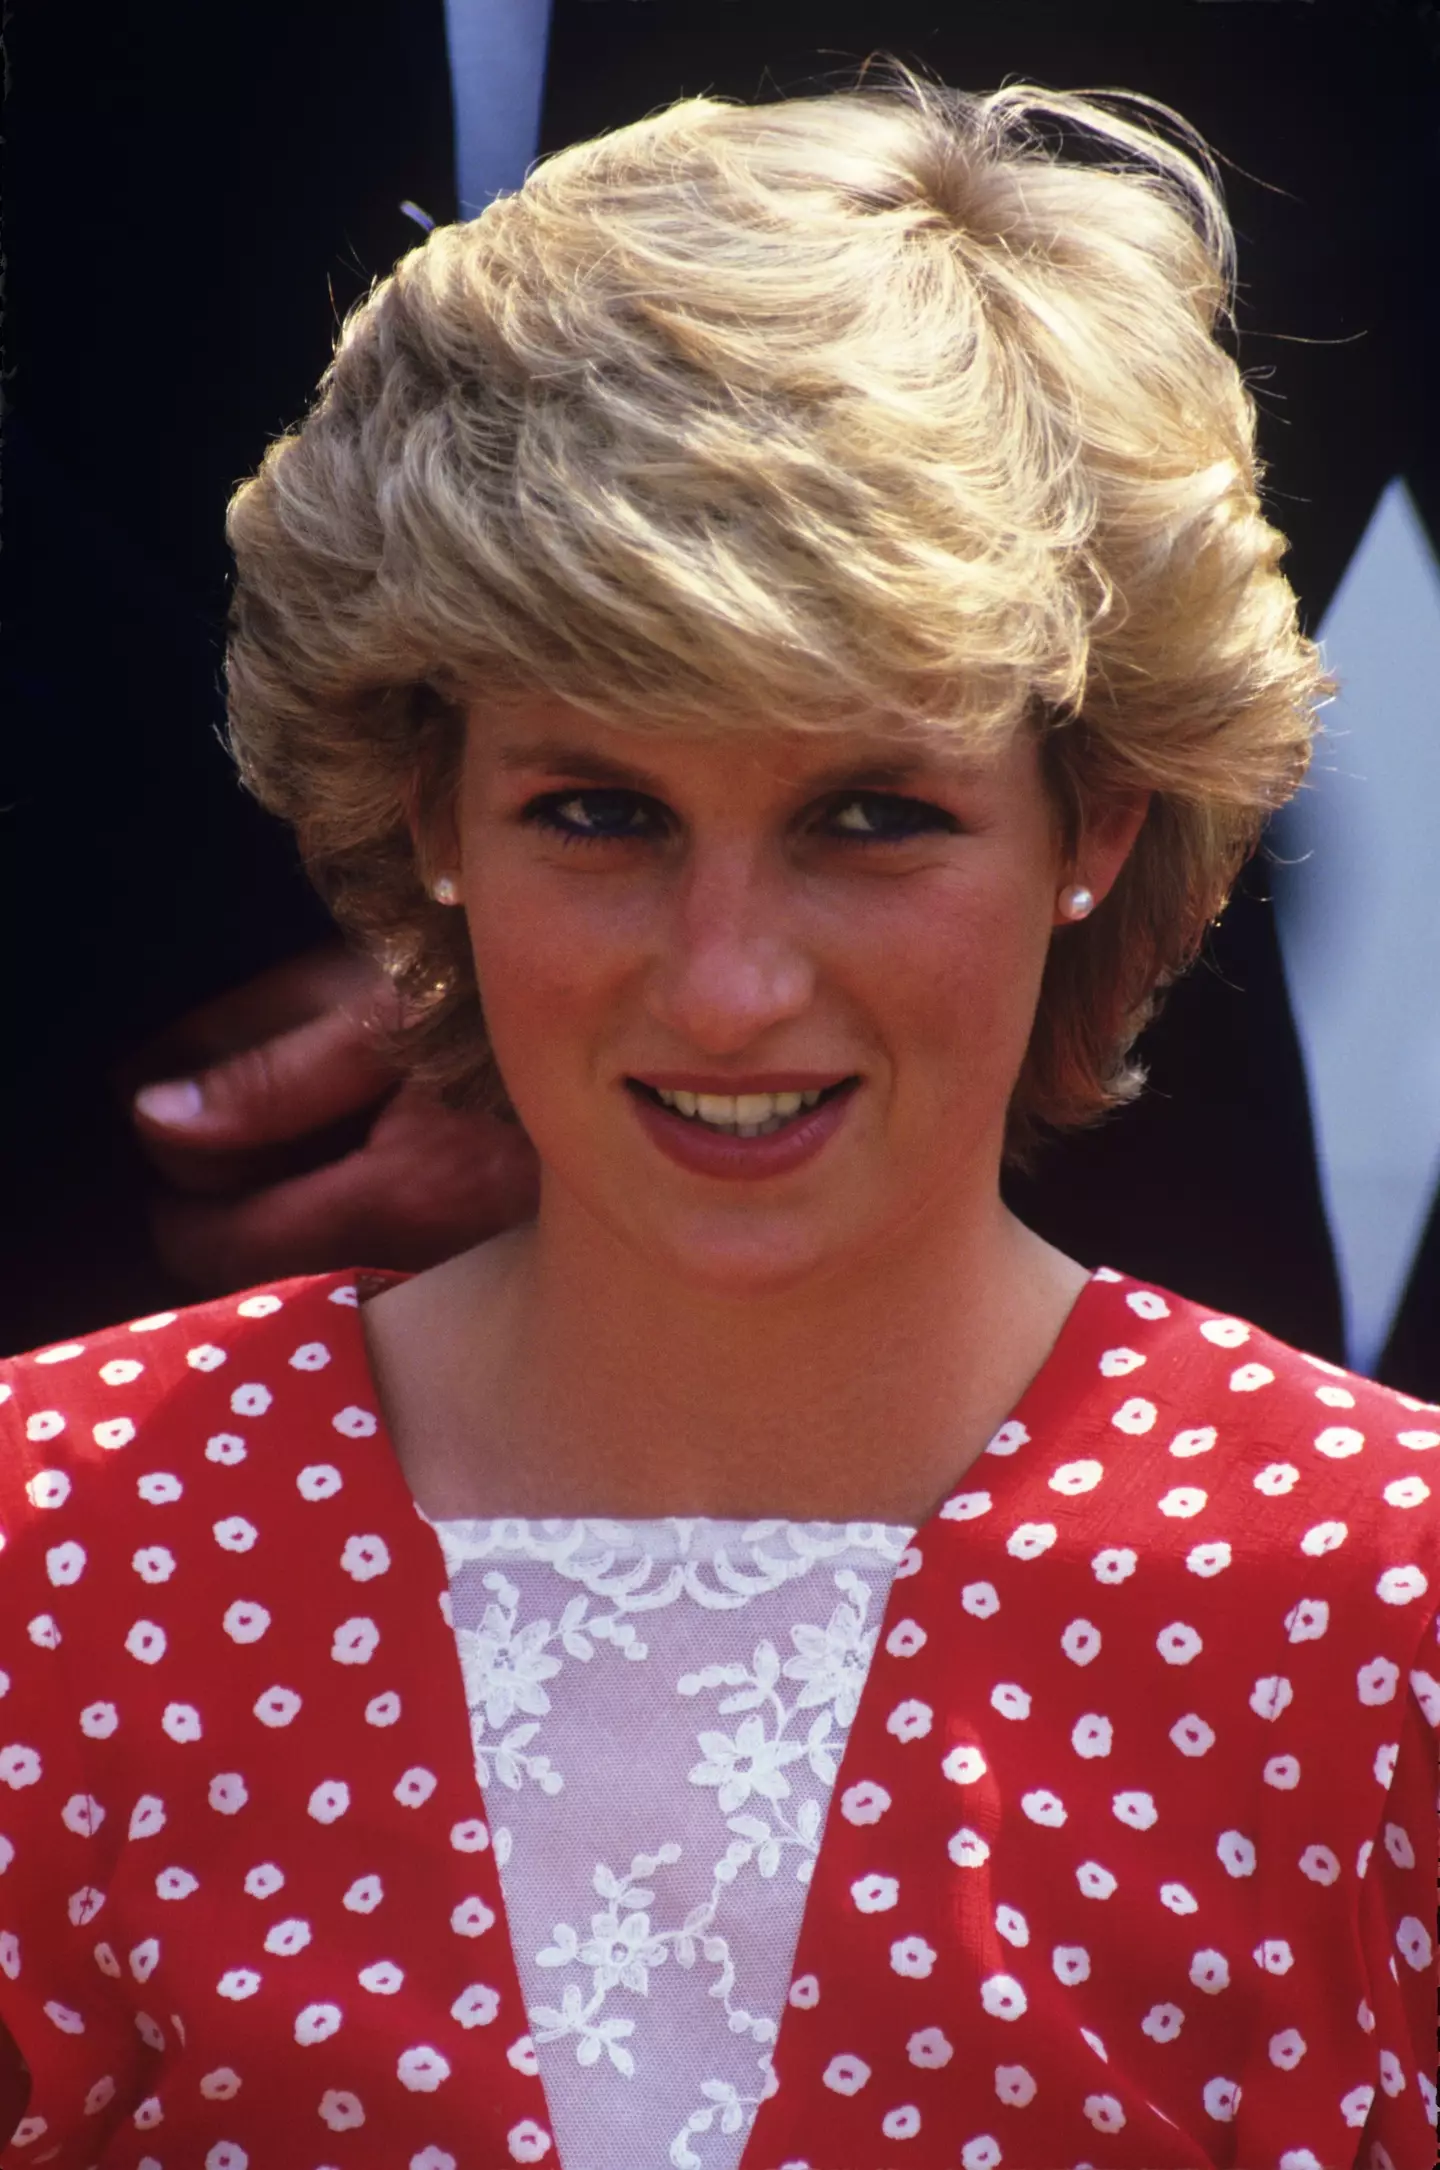 Princess Diana was the most beautiful princess in history according to the ancient Greeks.